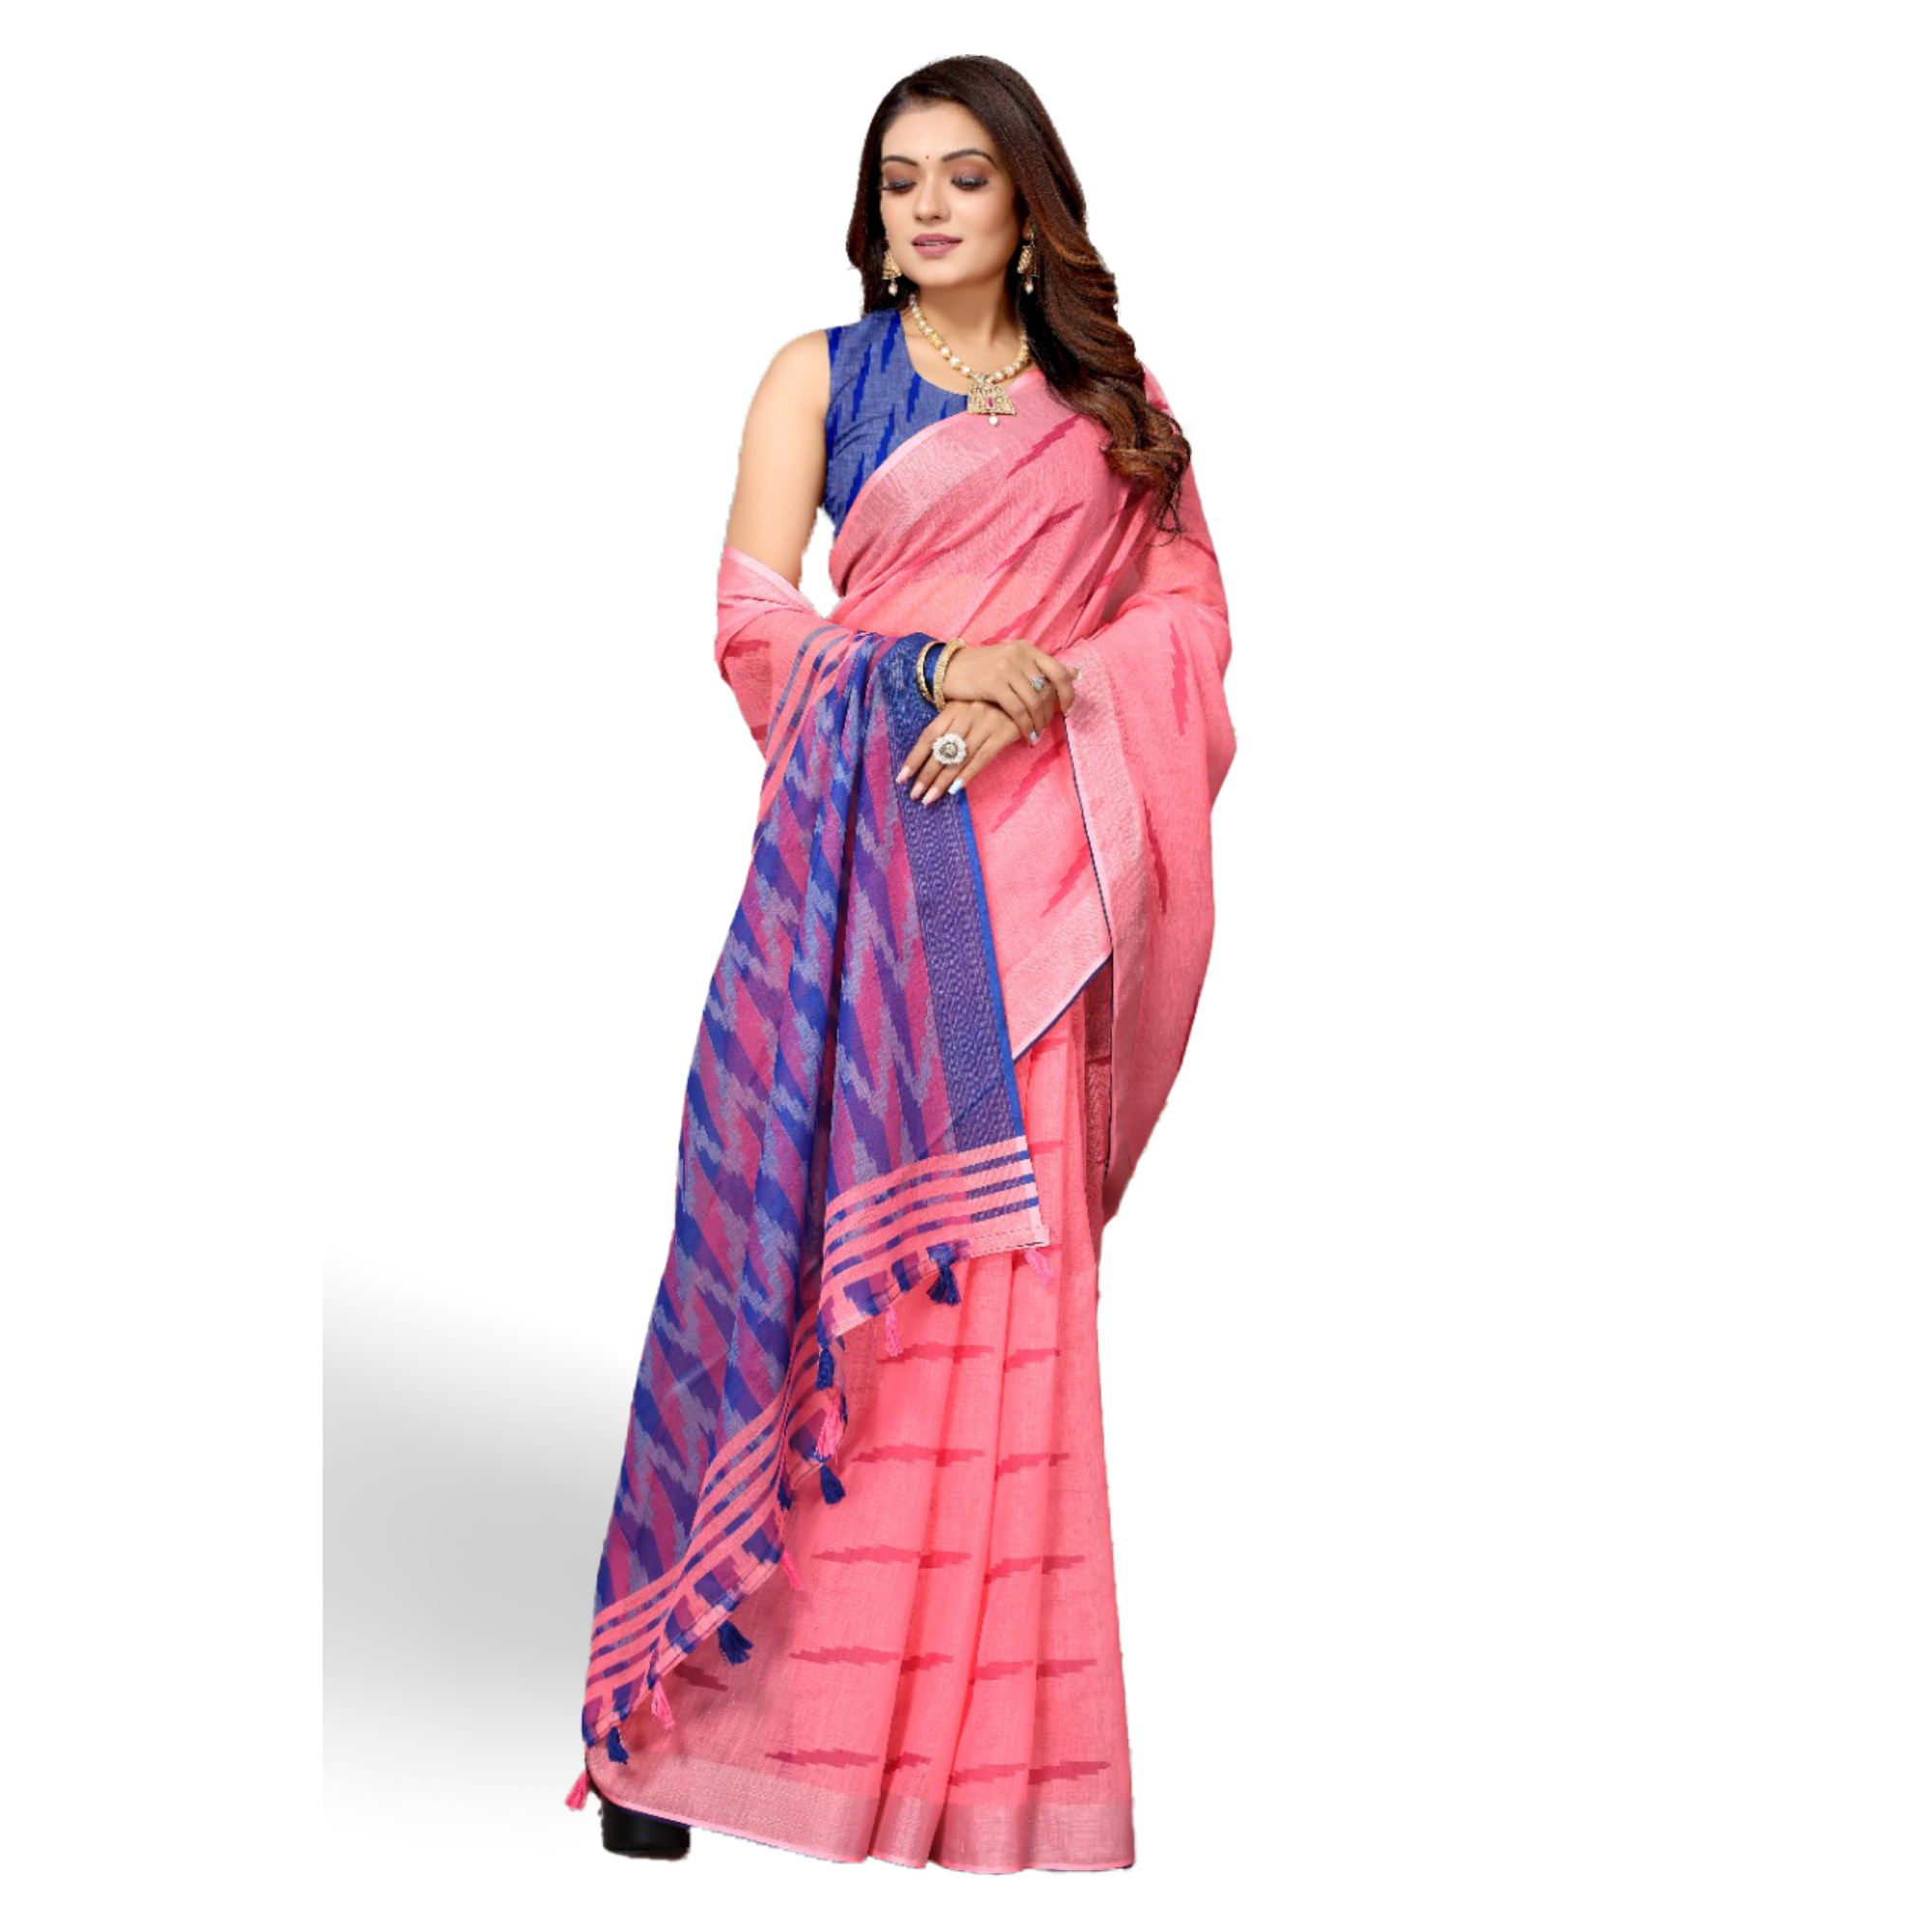 Women's Linen Printed Pink Saree with Blue Pallu - TheHangr